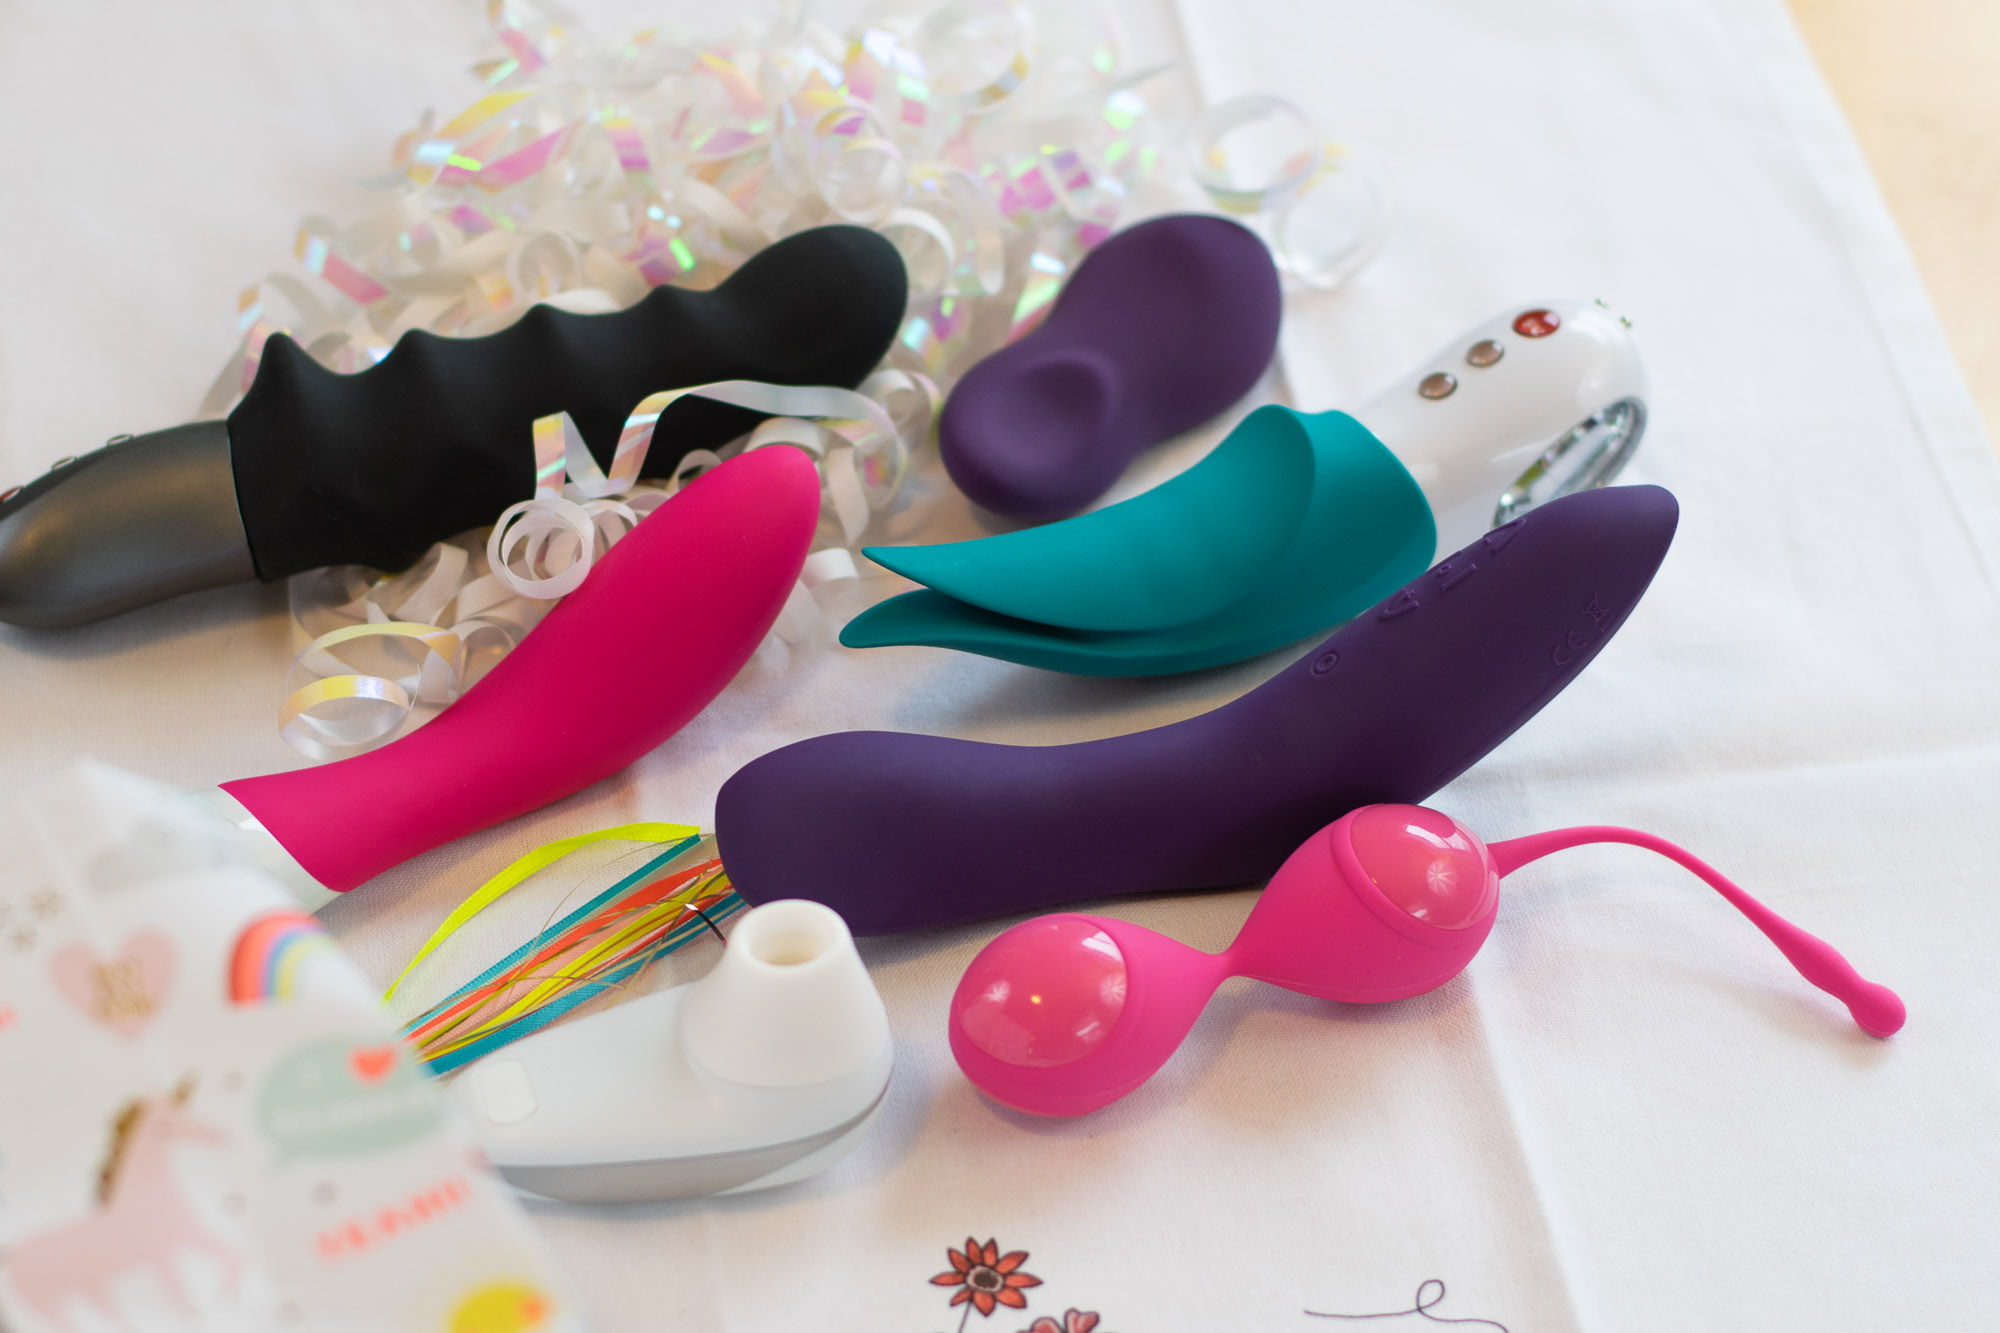 Epiphoras sex toy gift-giving guide » Hey Epiphora photo